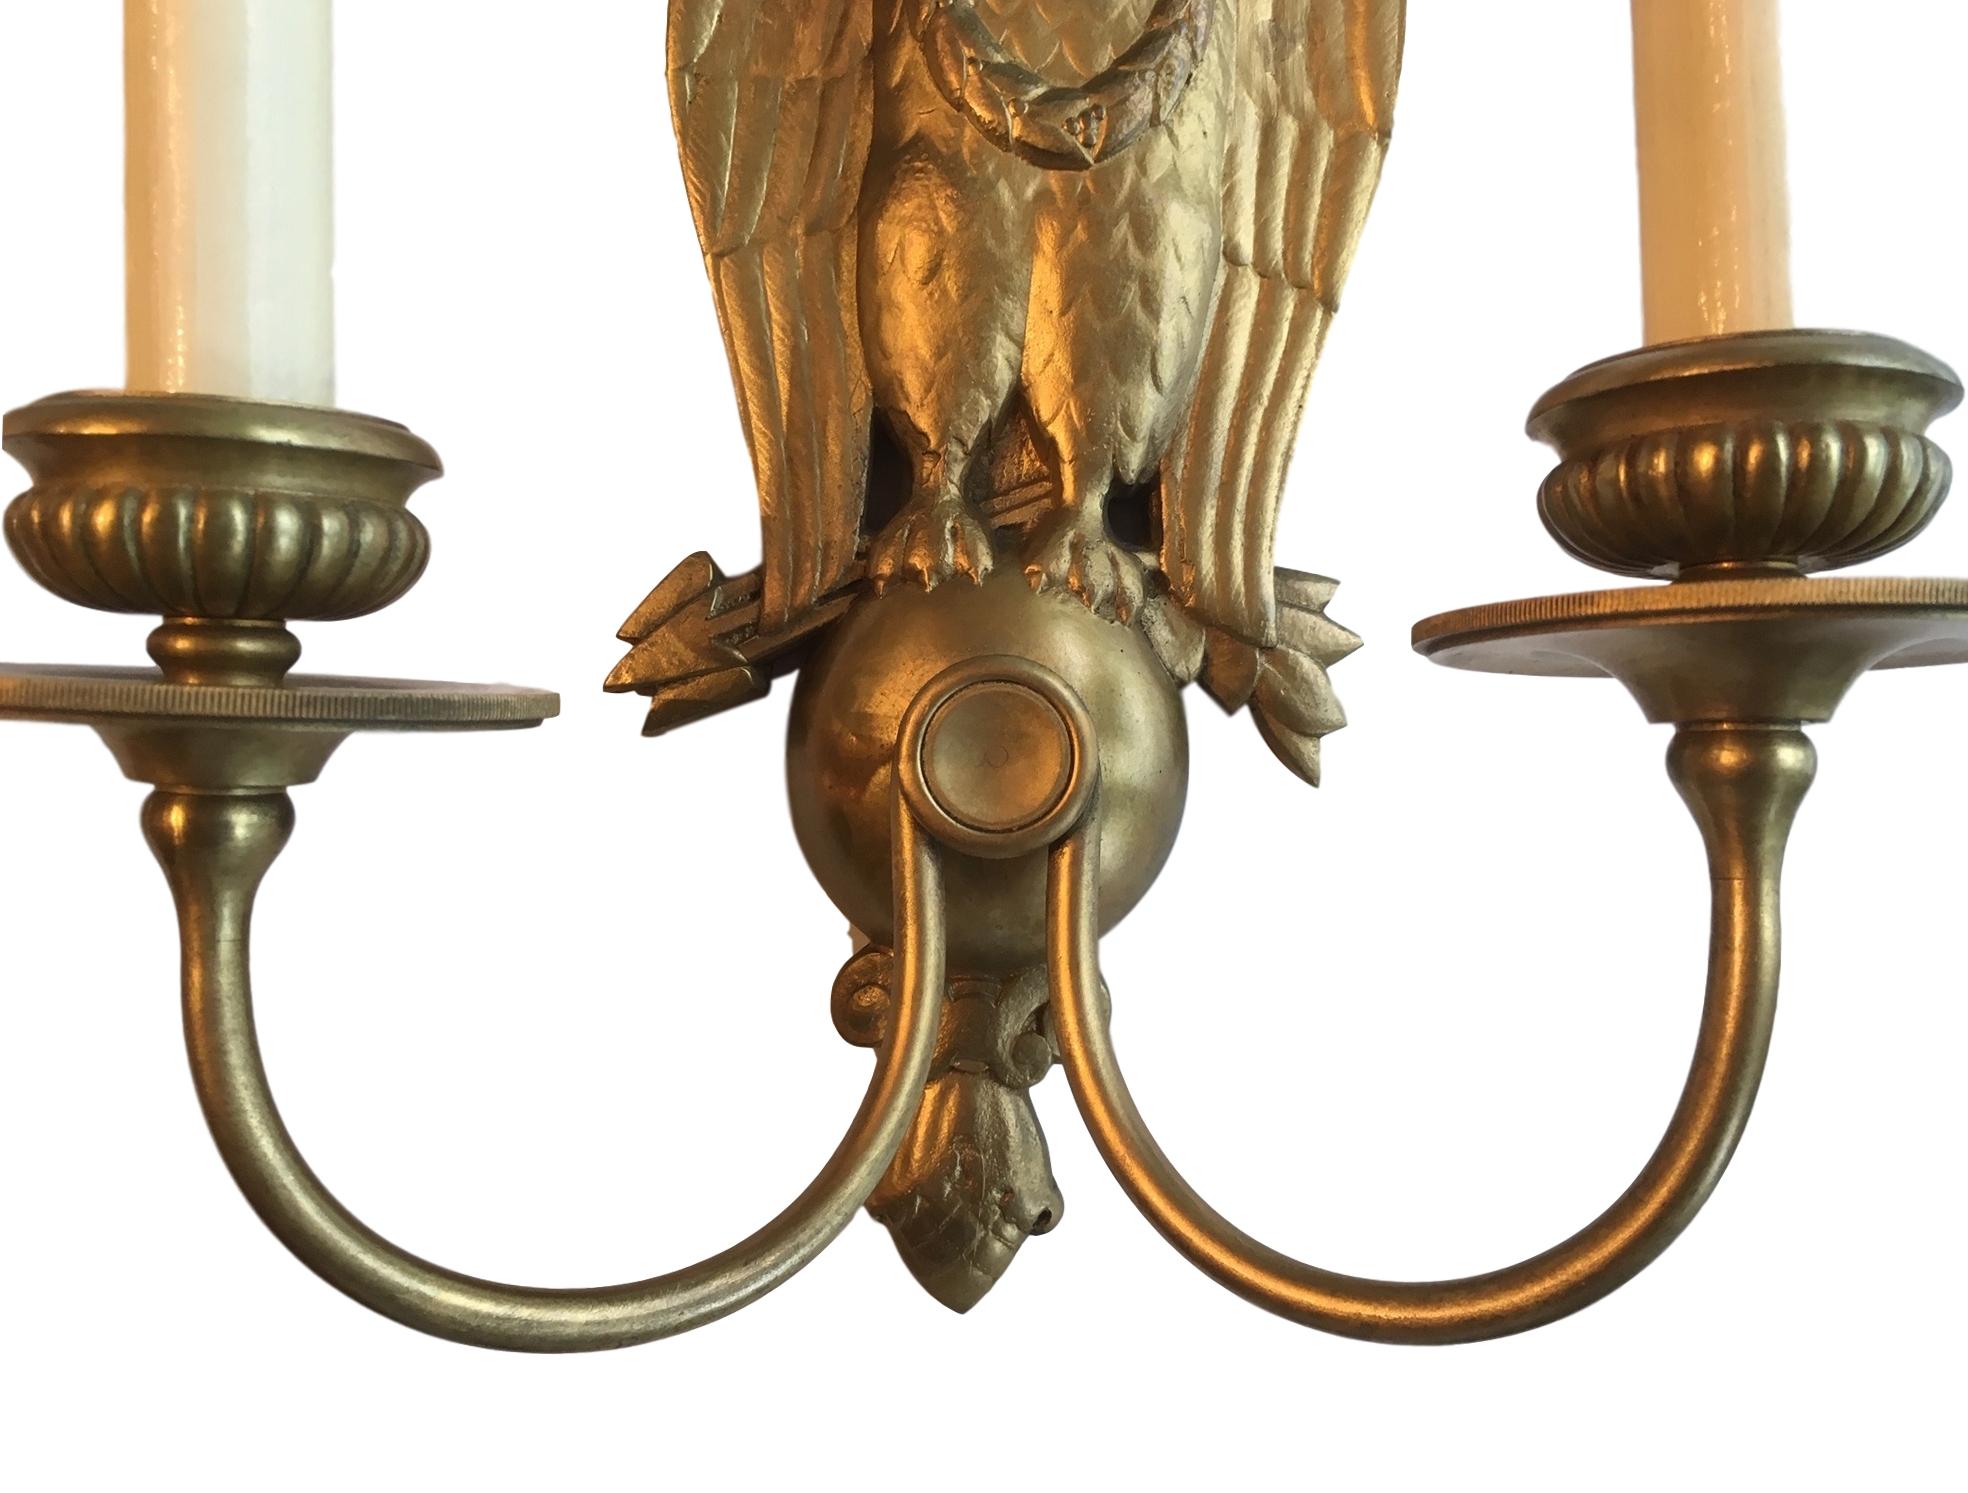 Pair of 1920s American Caldwell gilt bronze double light sconces with eagle shaped backplate.

Measurements:
Height 12'
Width 10.5?
Depth 5?